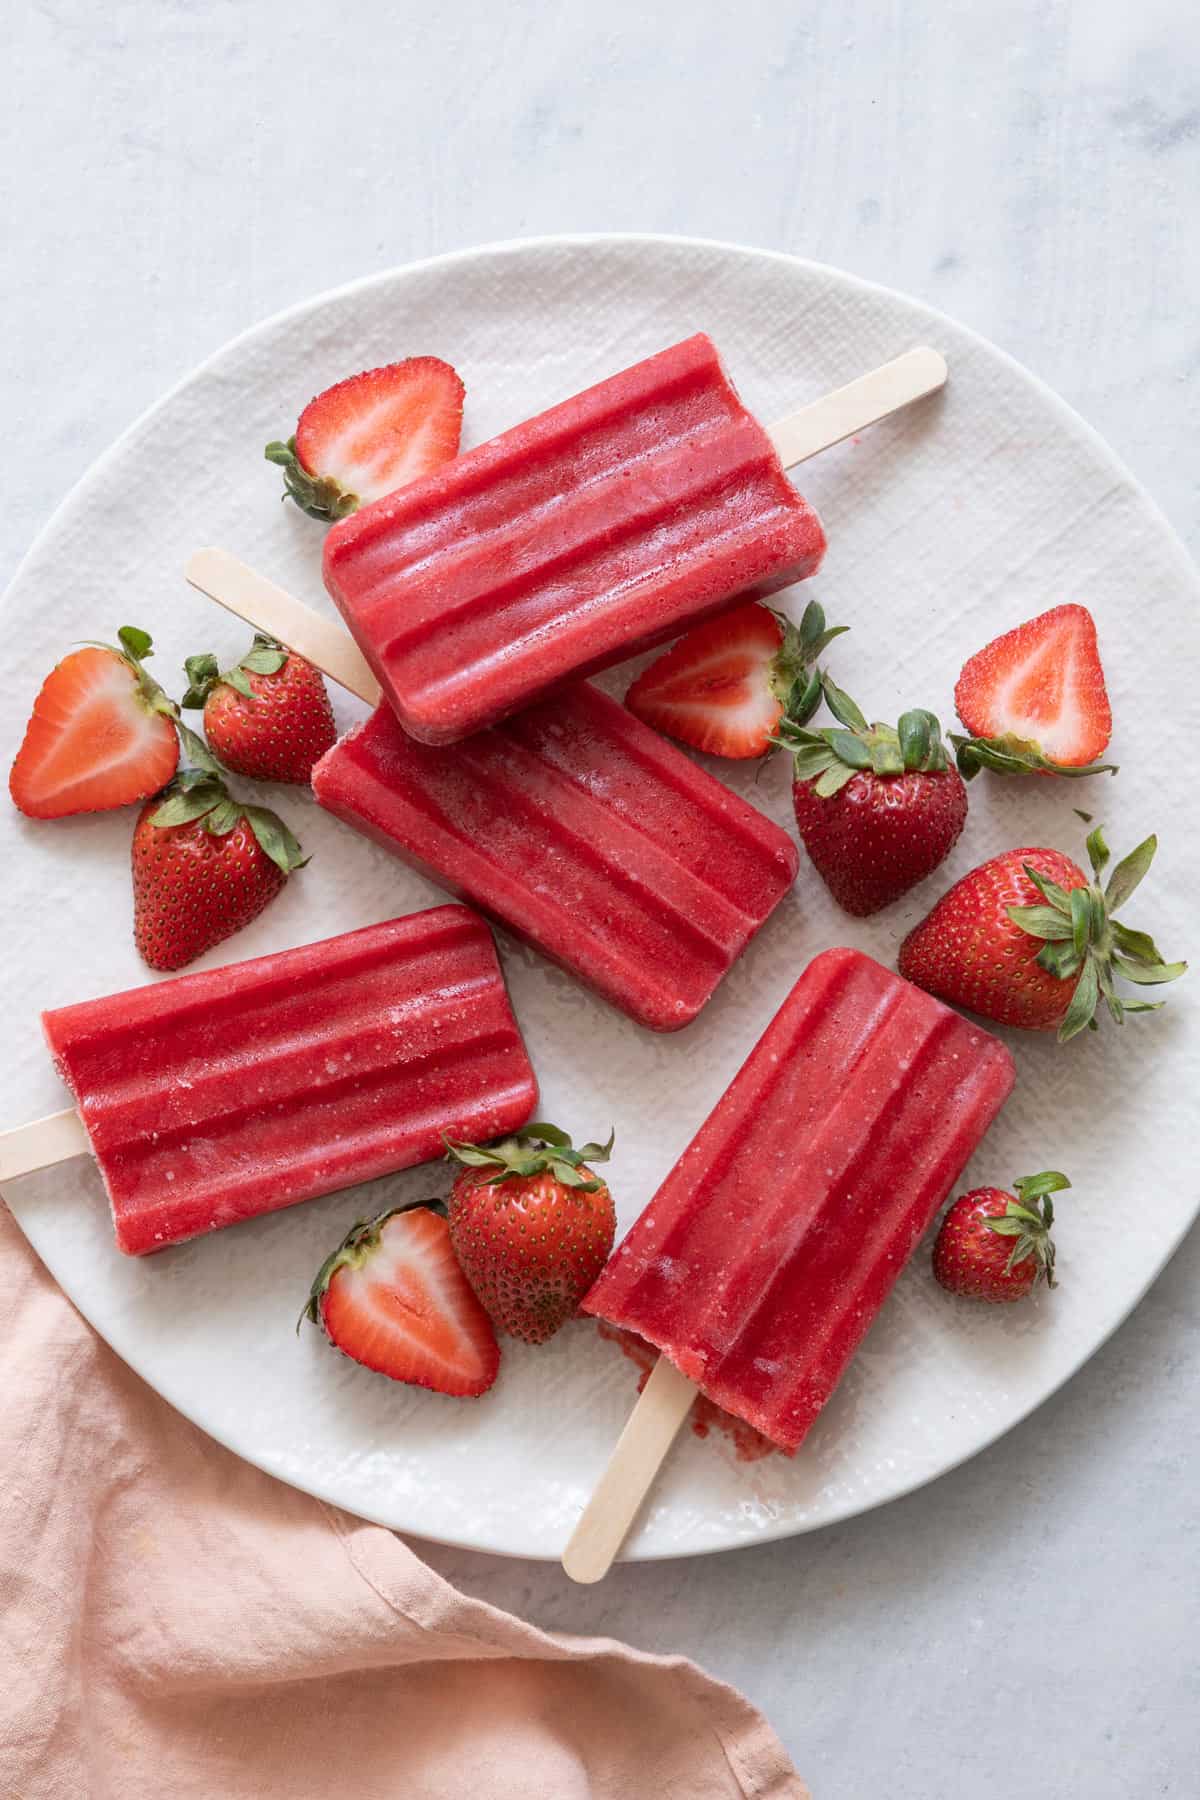 Large plate with four homemade strawberry popsicles and halved fresh strawberries.